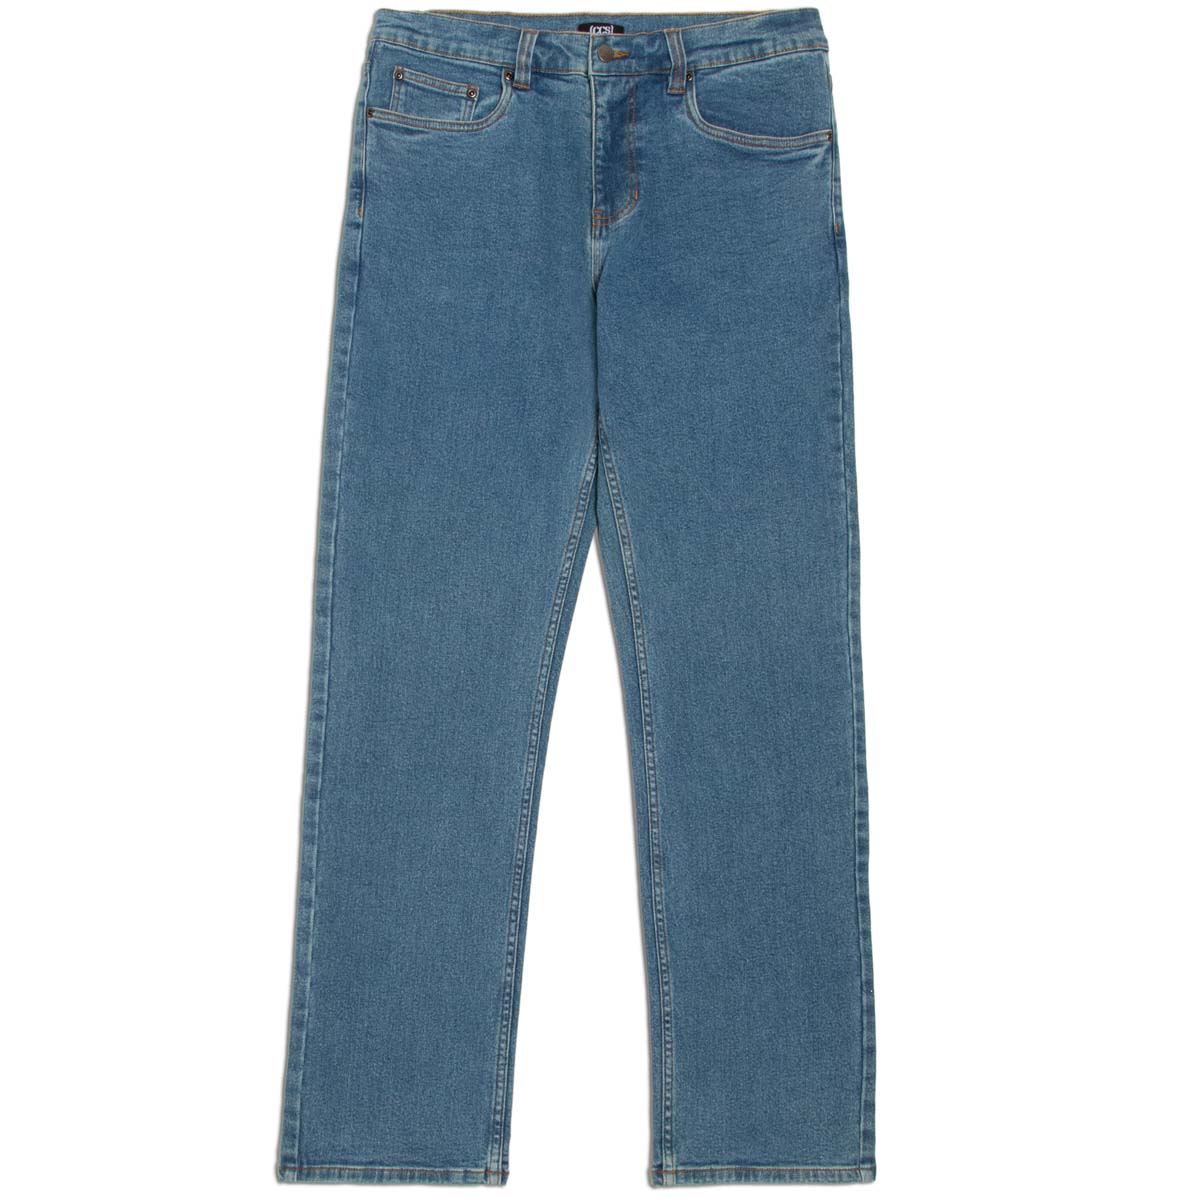 CCS 12oz Stretch Relaxed Denim Jeans - 12oz Rinse image 5